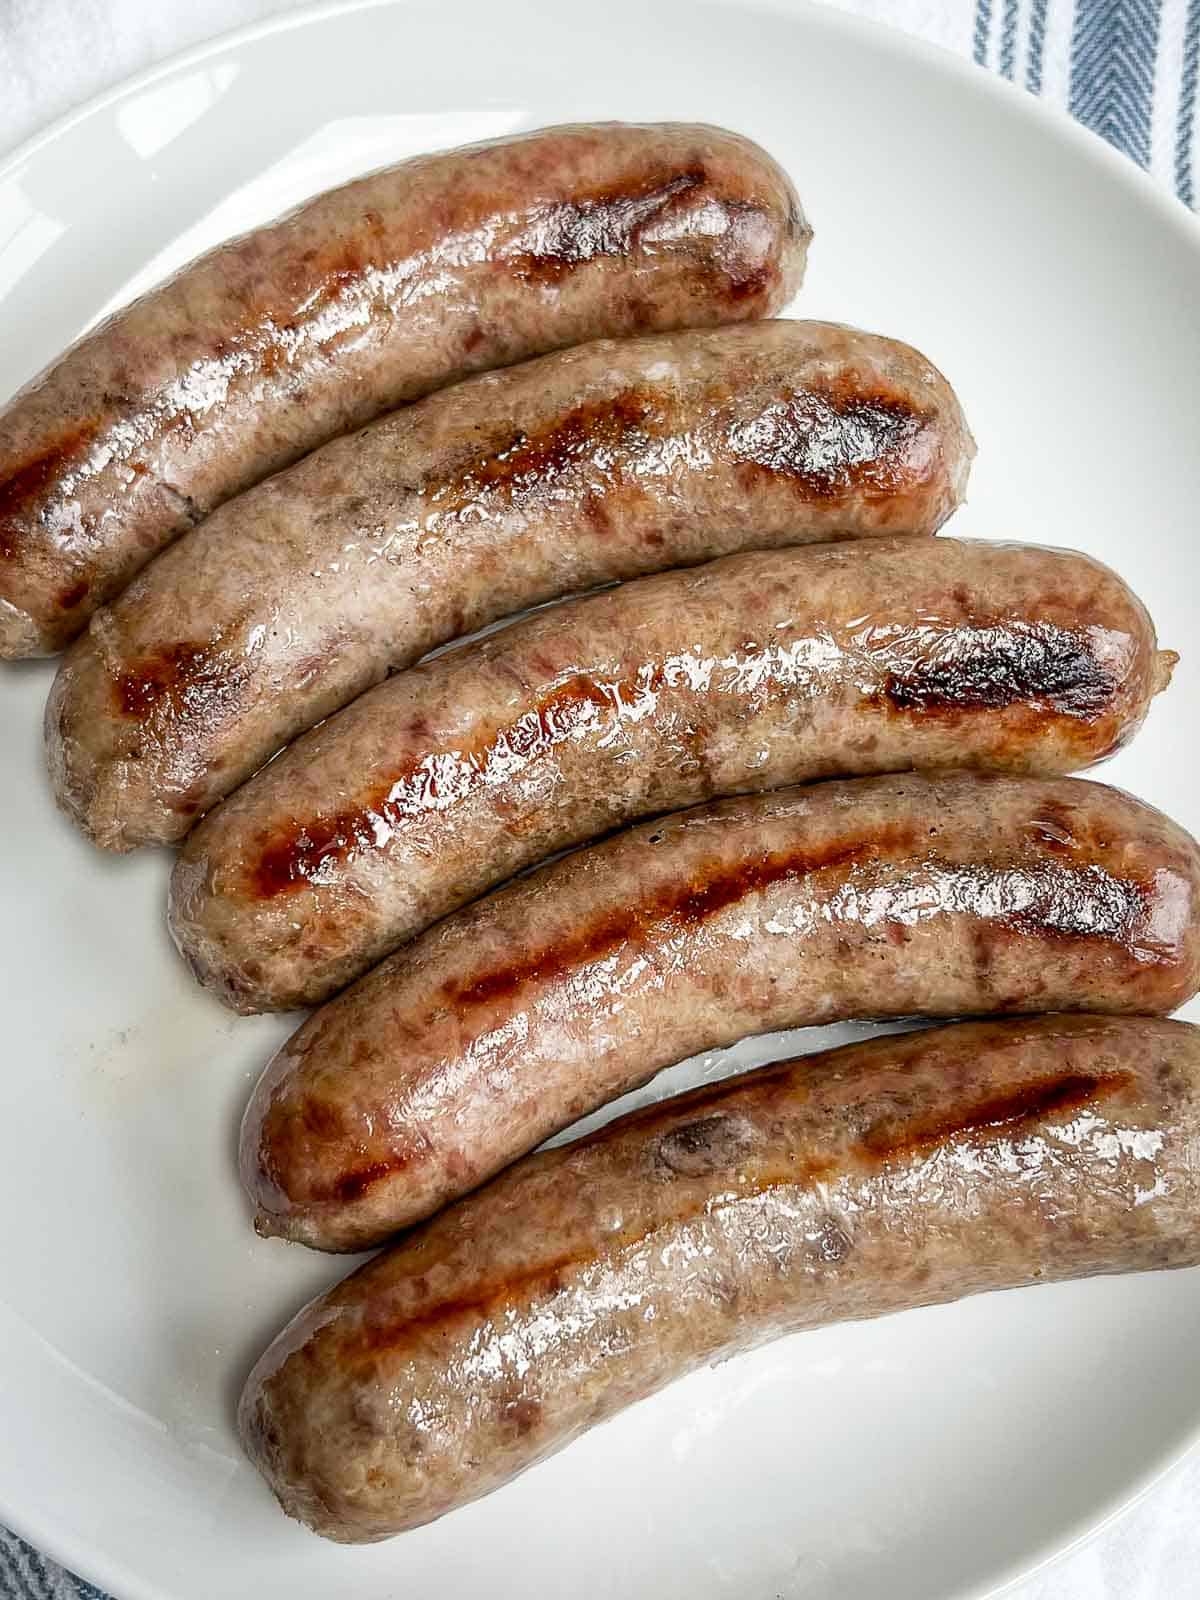 5 grilled beer brats lined up on a white plate.